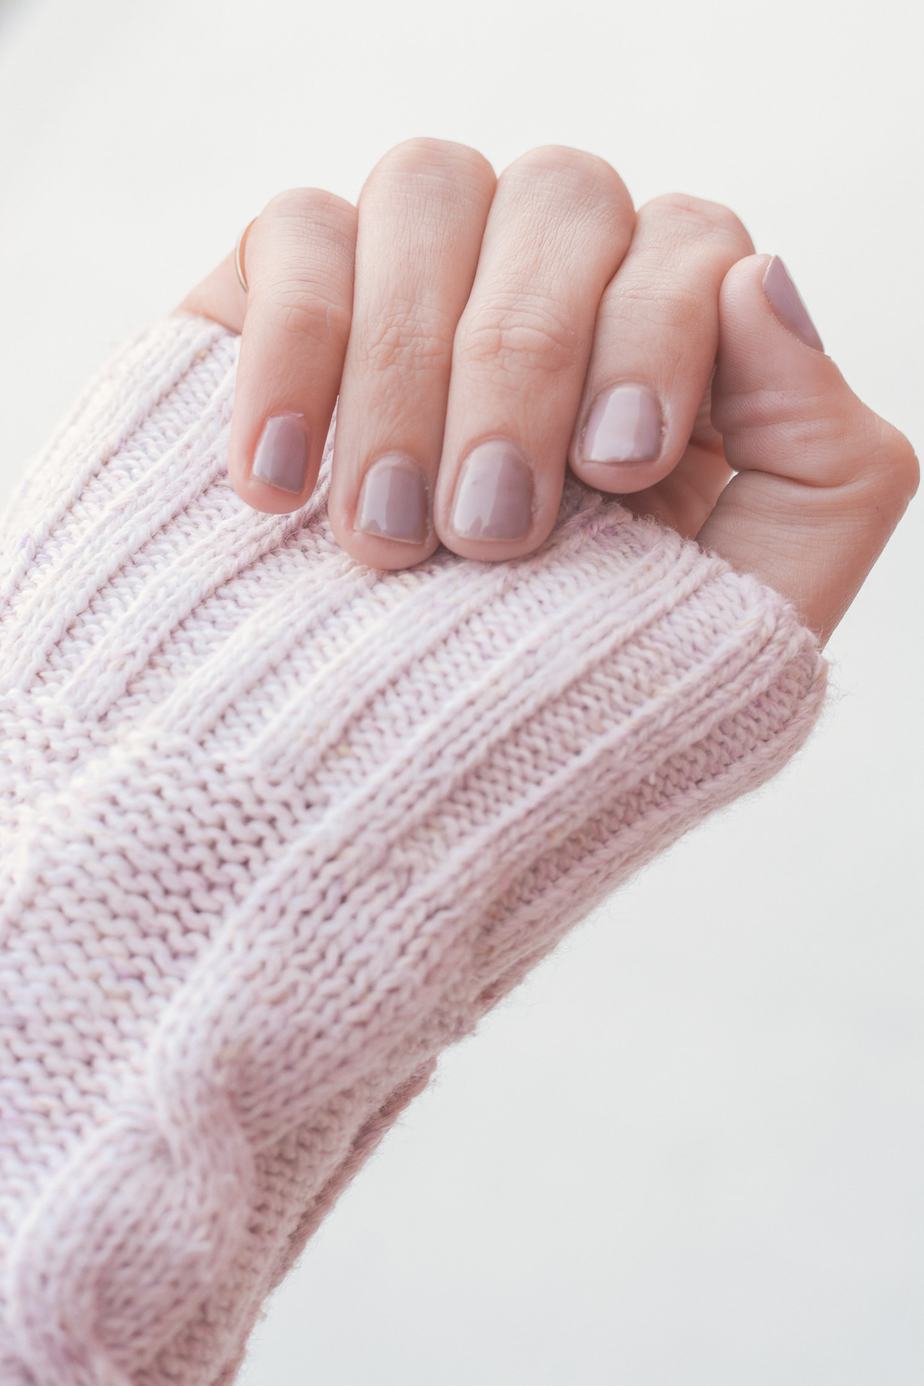 how to do gel nails at home